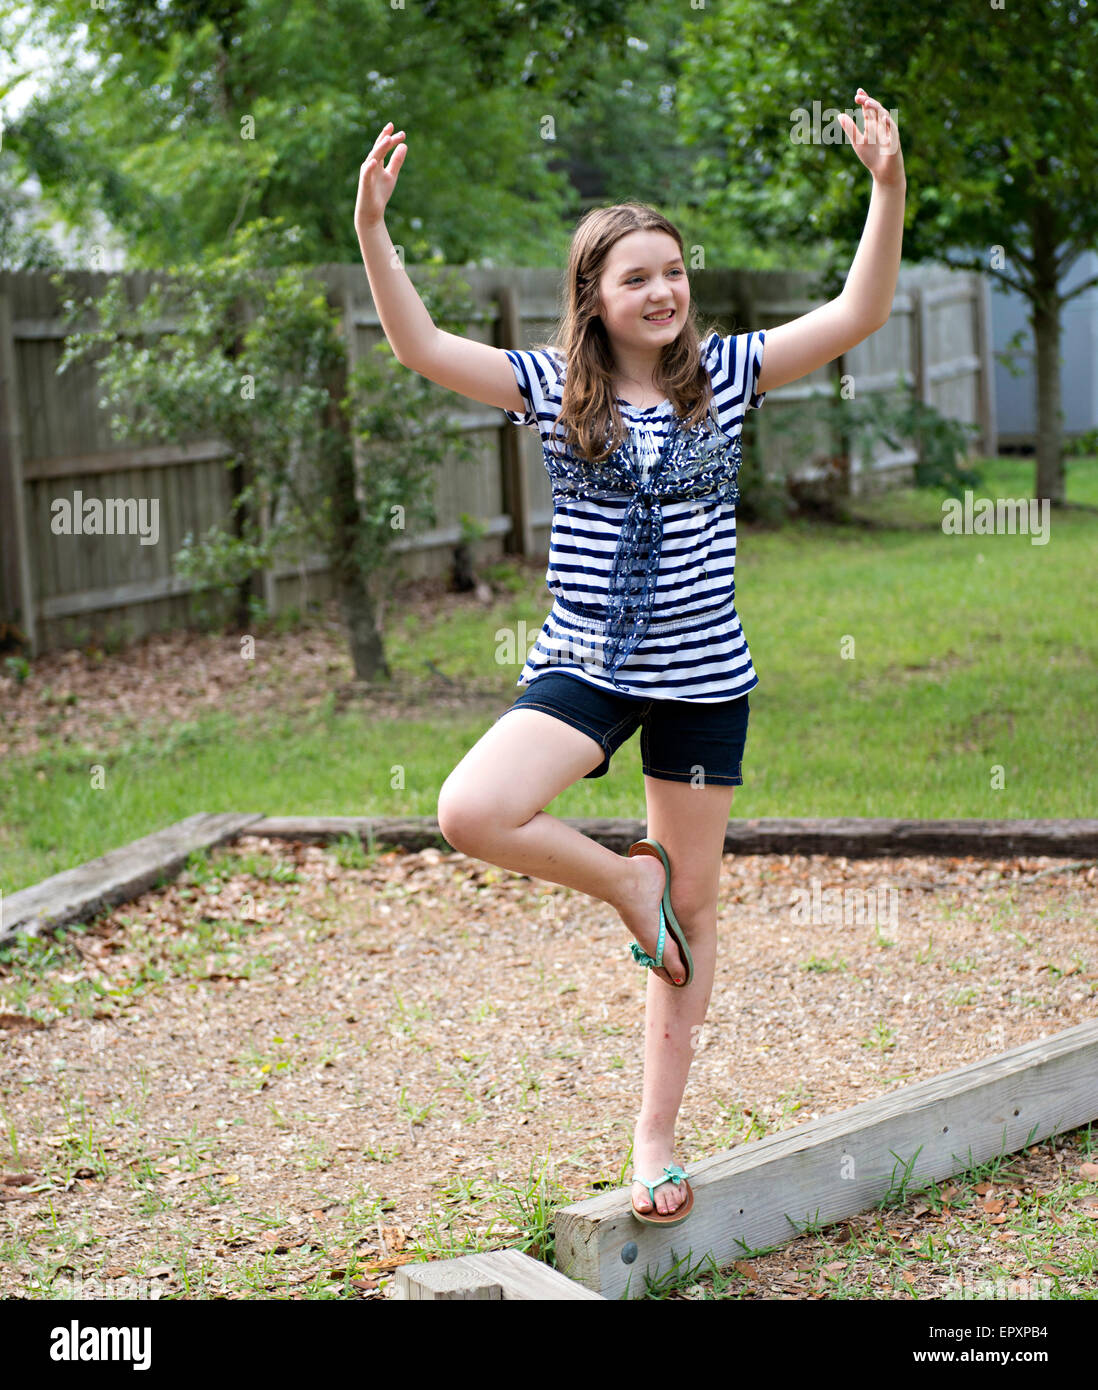 Teenage girl walking on an outdoor wooden balance beam with a ballerina pose Stock Photo